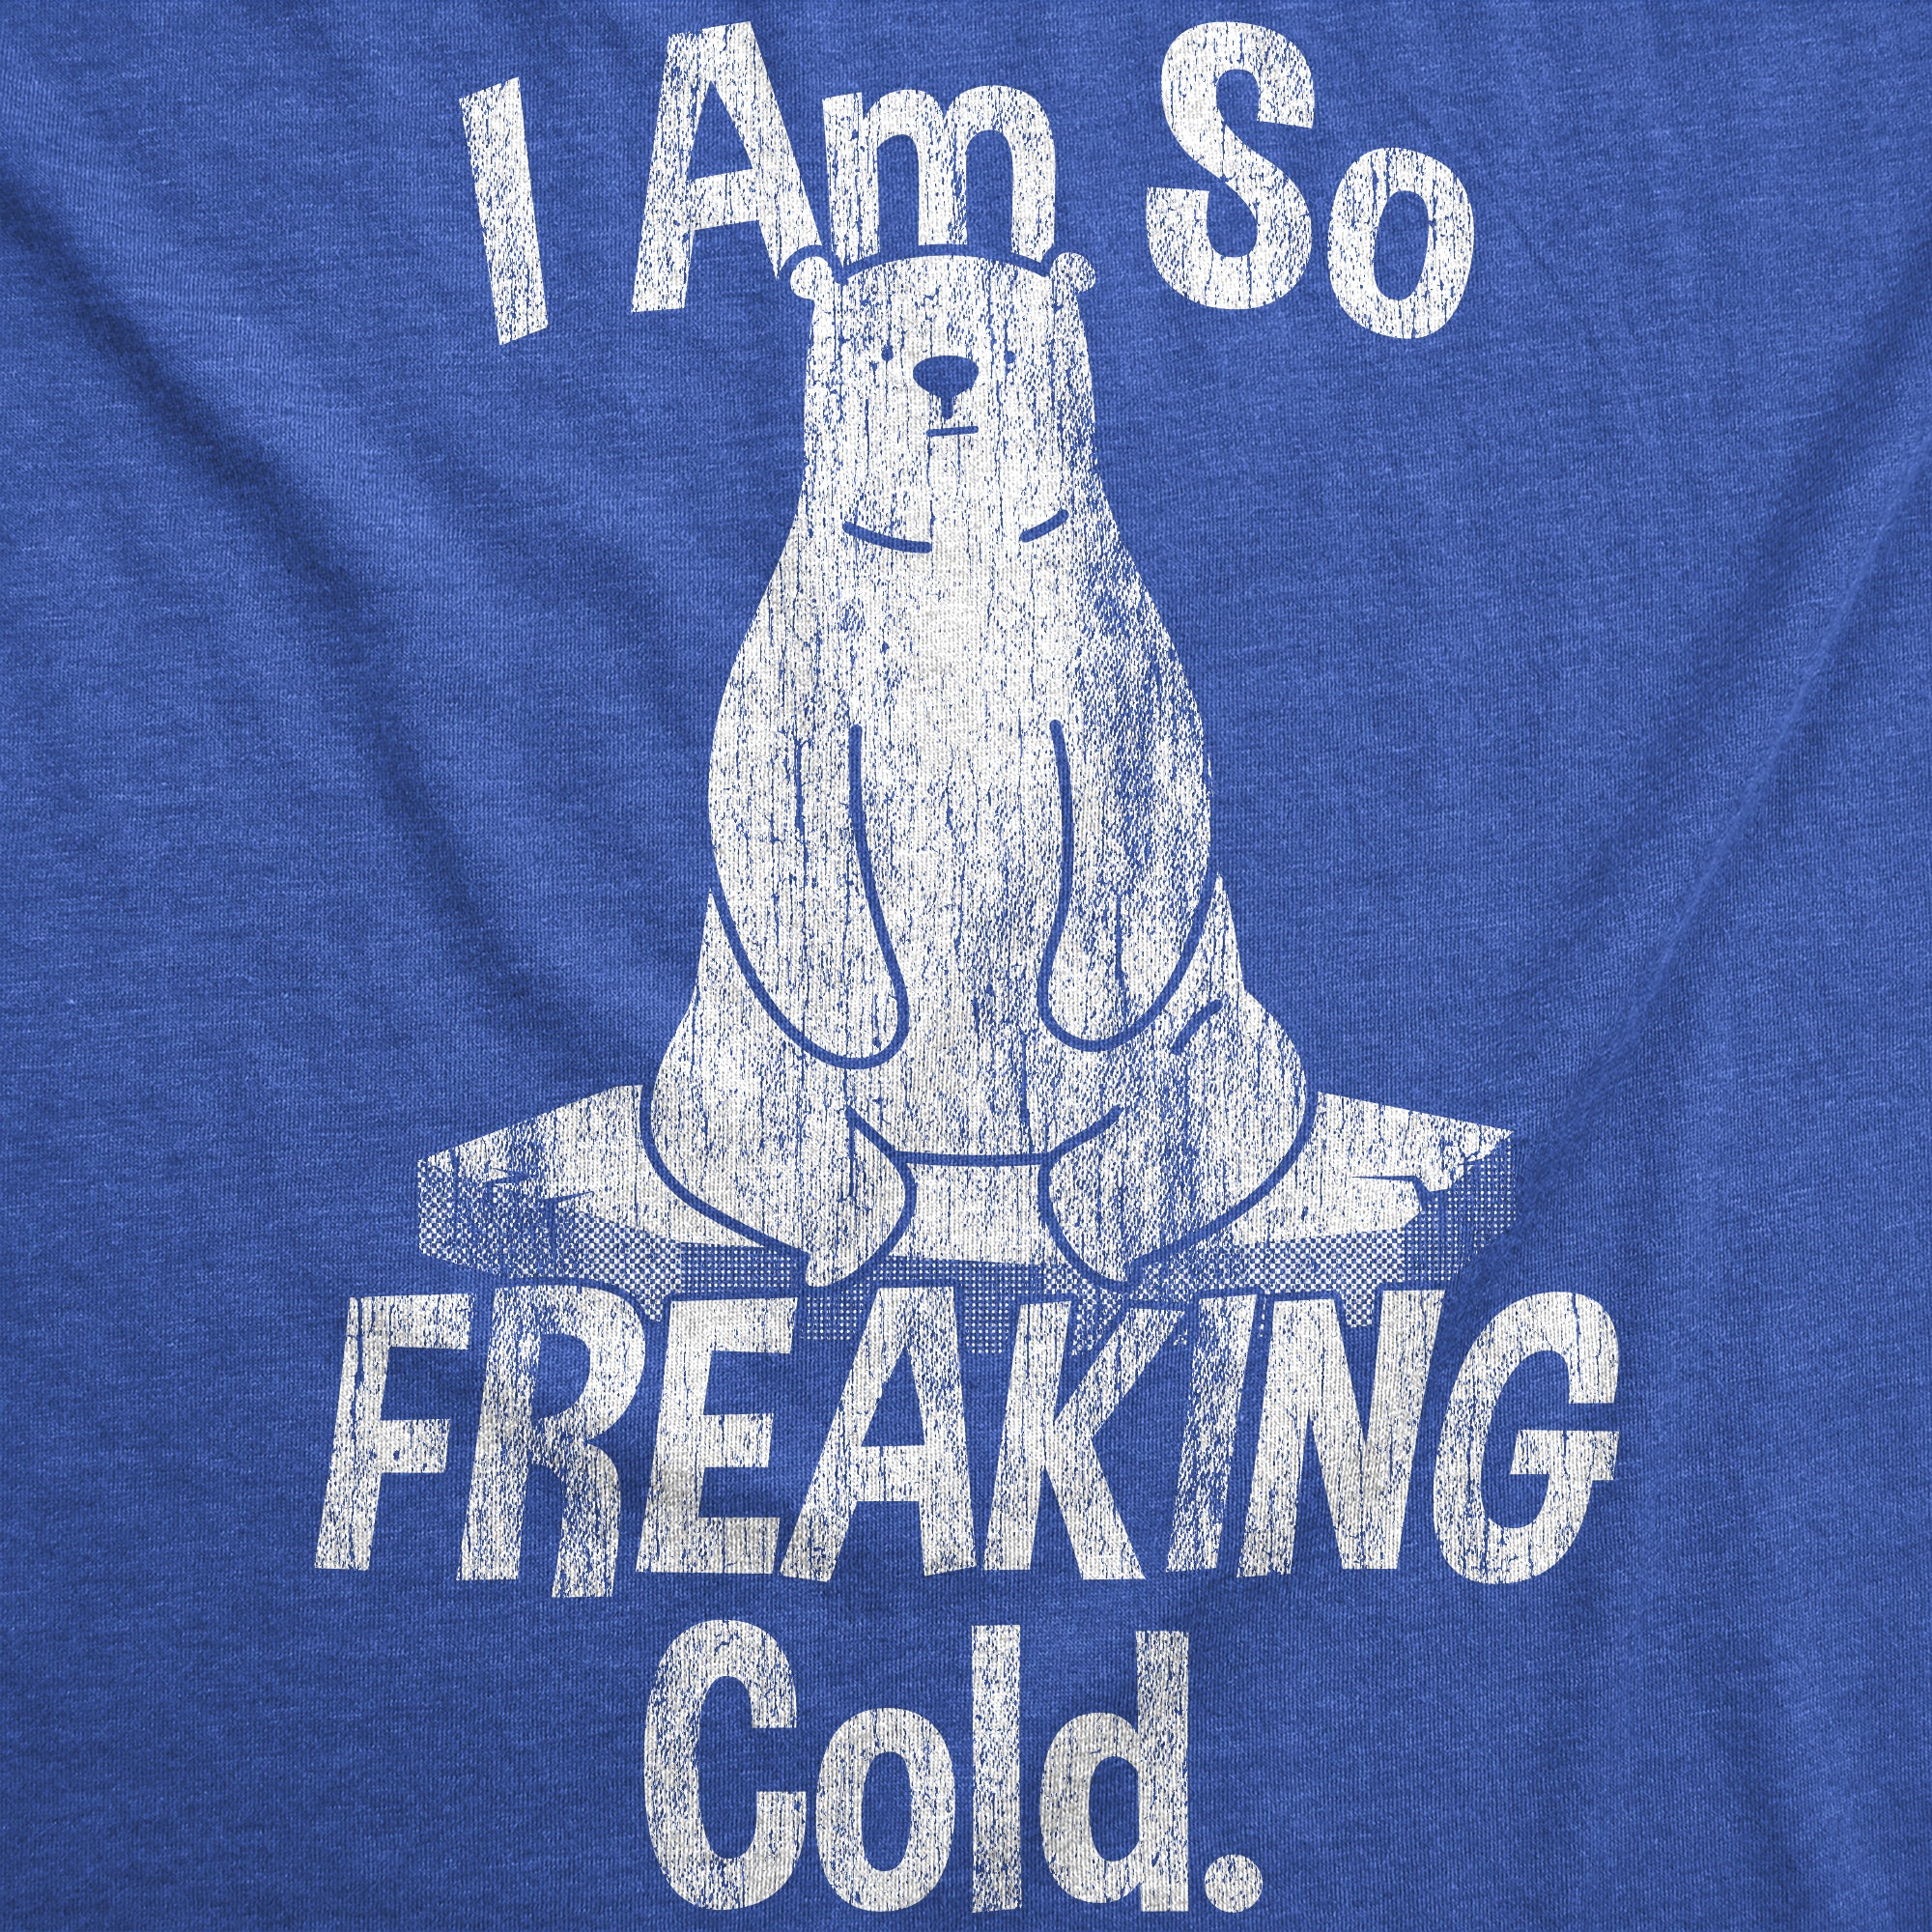 Funny Heather Royal - I Am So Freaking Cold I Am So Freaking Cold Womens T Shirt Nerdy sarcastic Tee